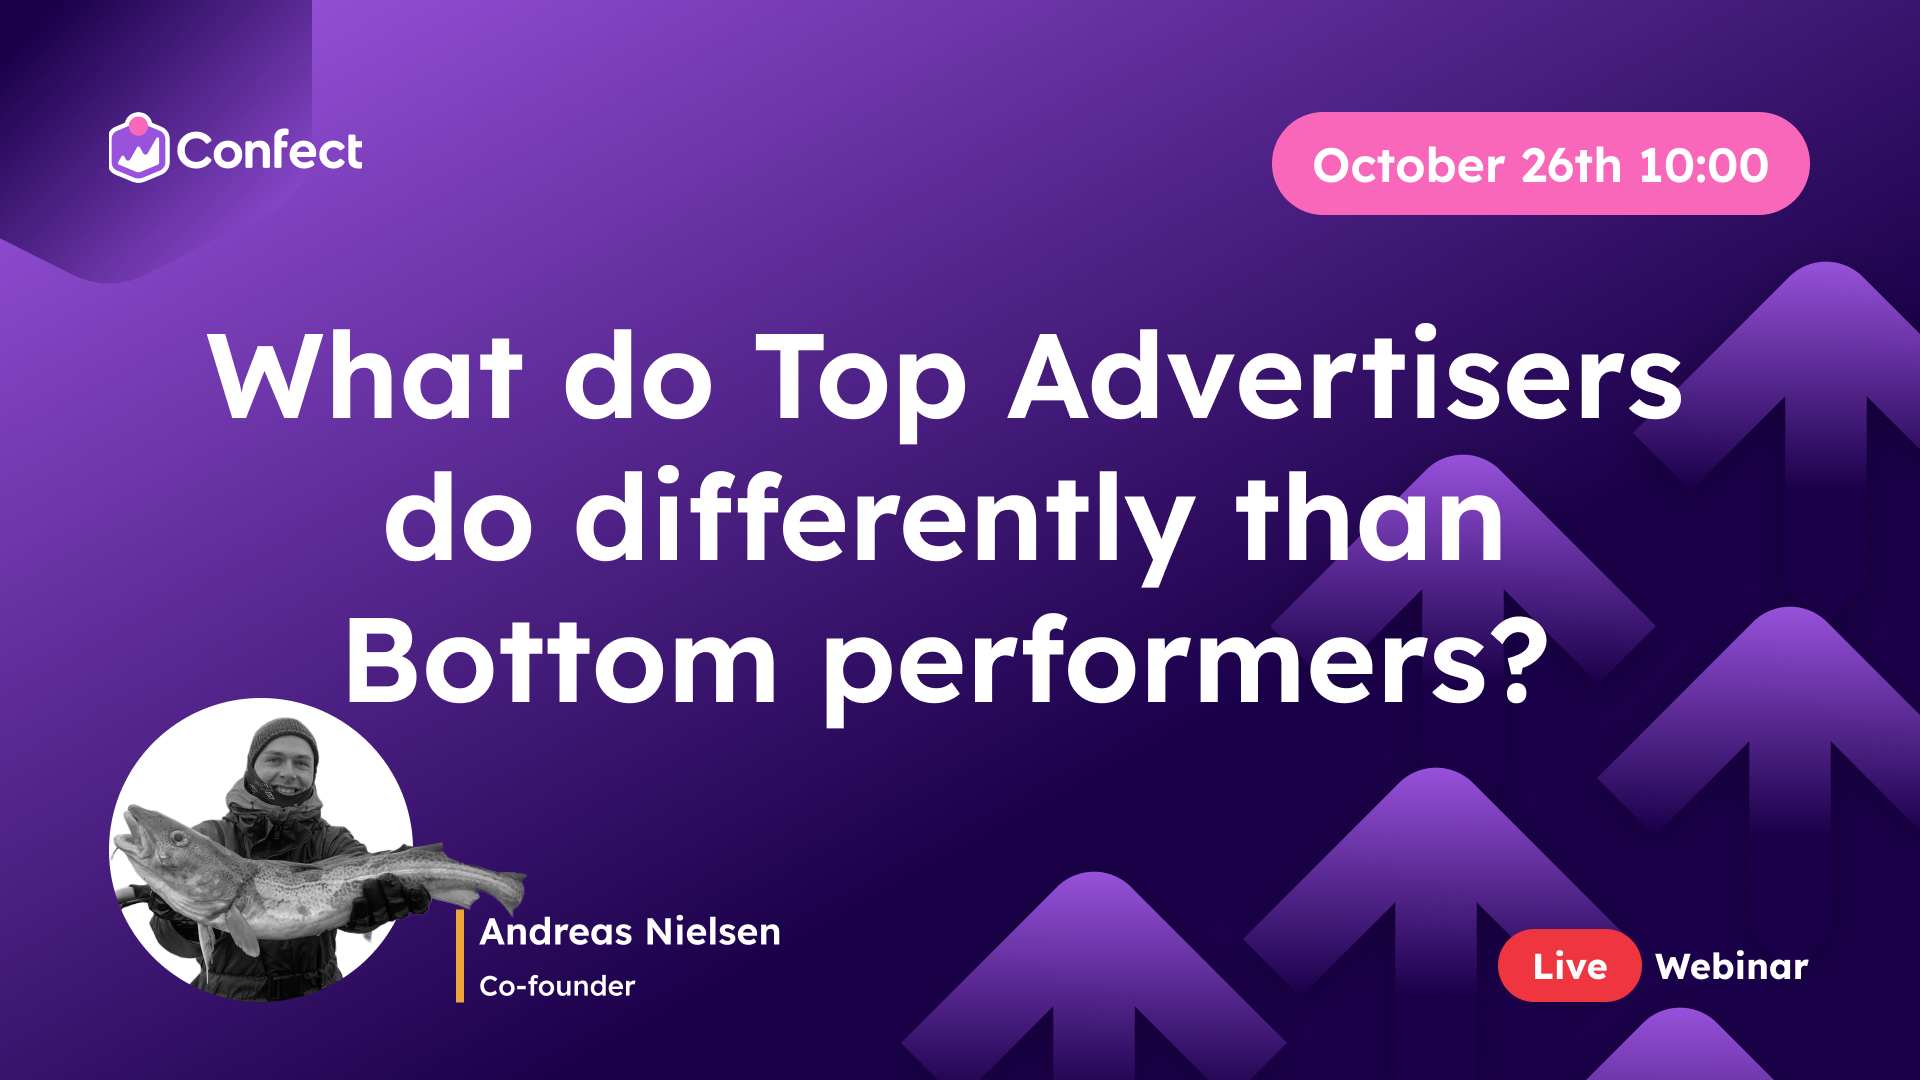 What do Top Advertisers do differently than Bottom performers?